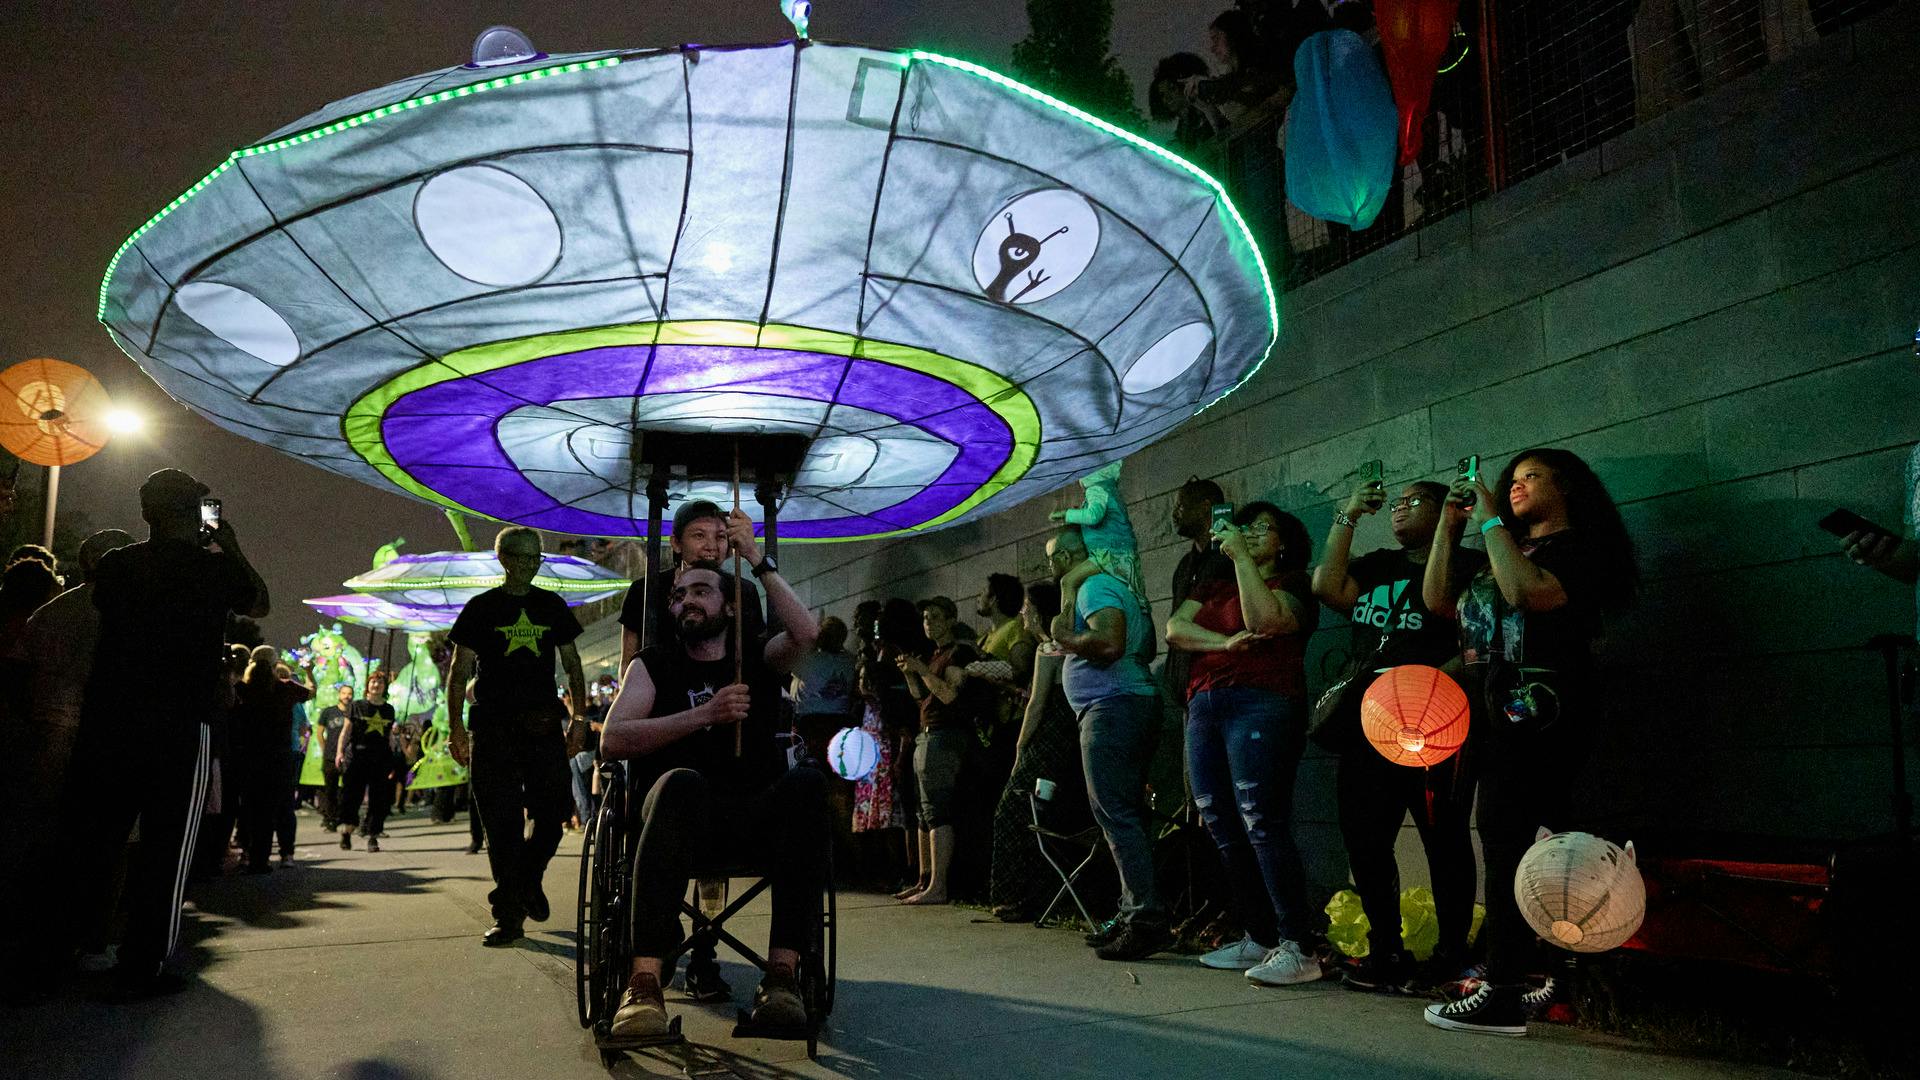 A man in a wheelchair holds a large illuminated puppet of an alien spaceship.